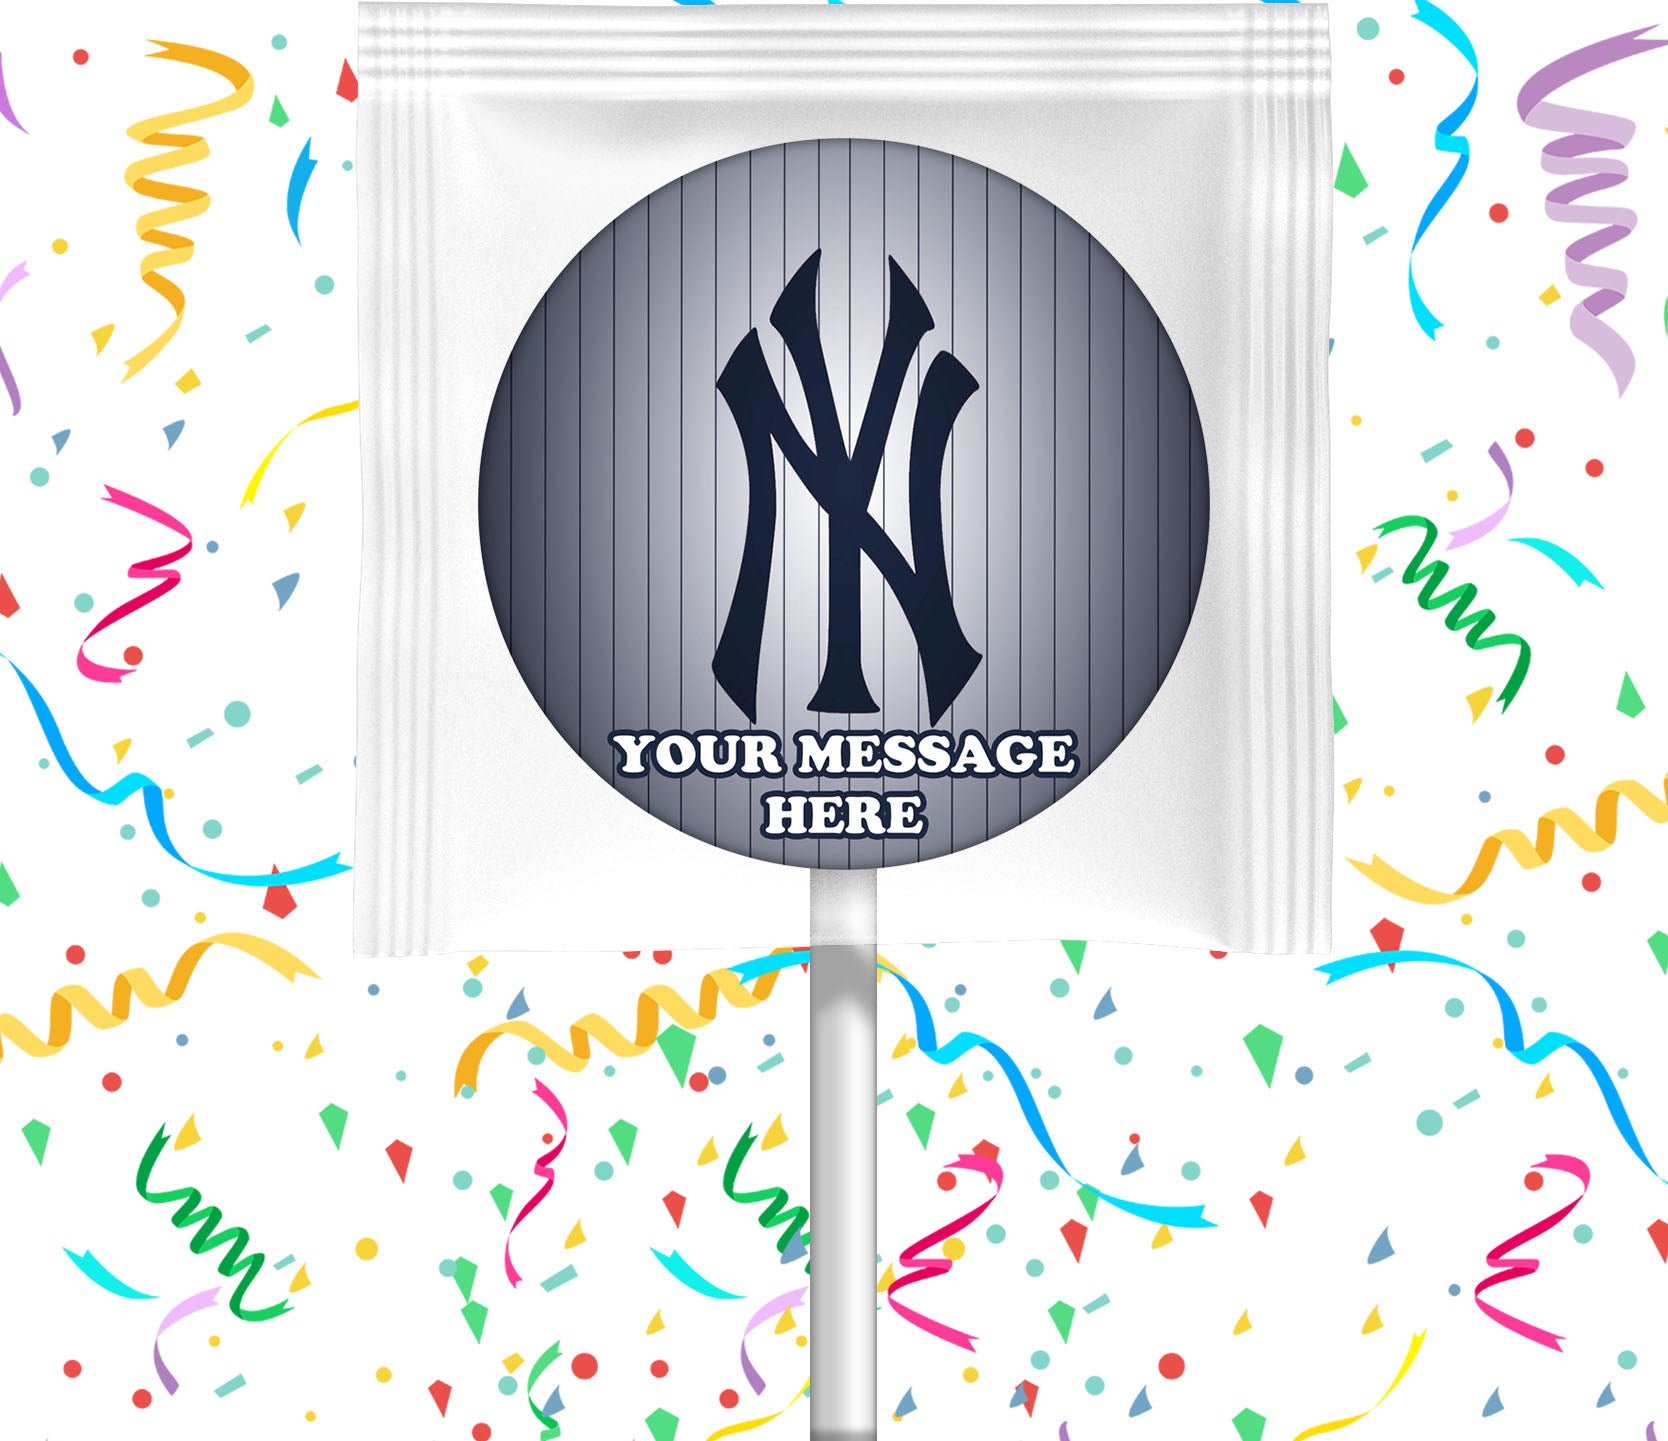 New York Yankees Edible Image Cake Topper Personalized Birthday Sheet -  PartyCreationz